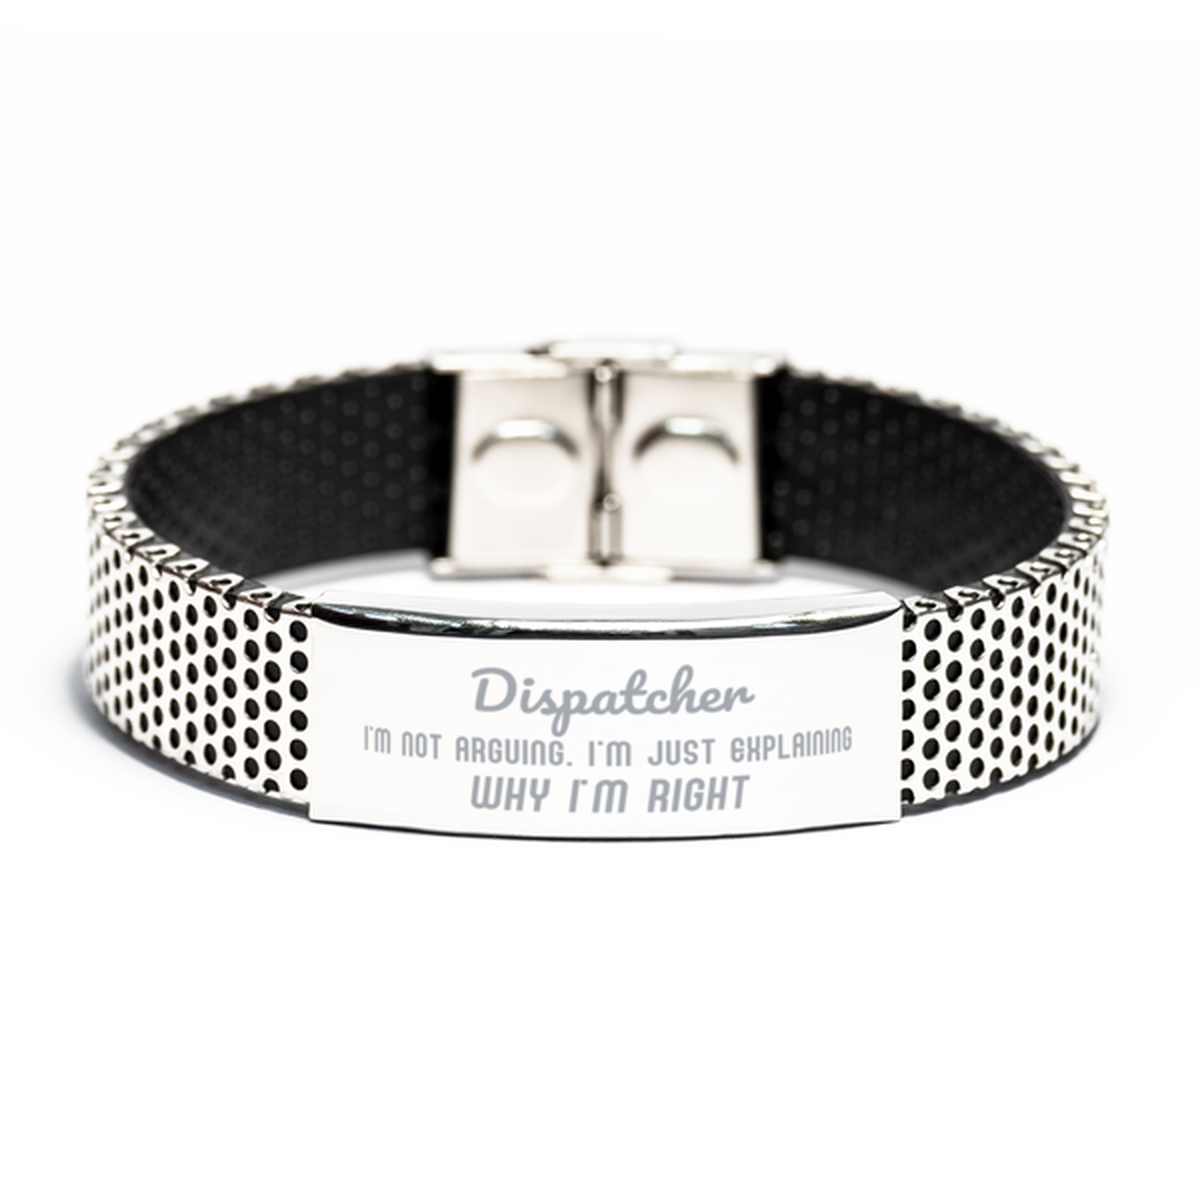 Dispatcher I'm not Arguing. I'm Just Explaining Why I'm RIGHT Stainless Steel Bracelet, Funny Saying Quote Dispatcher Gifts For Dispatcher Graduation Birthday Christmas Gifts for Men Women Coworker